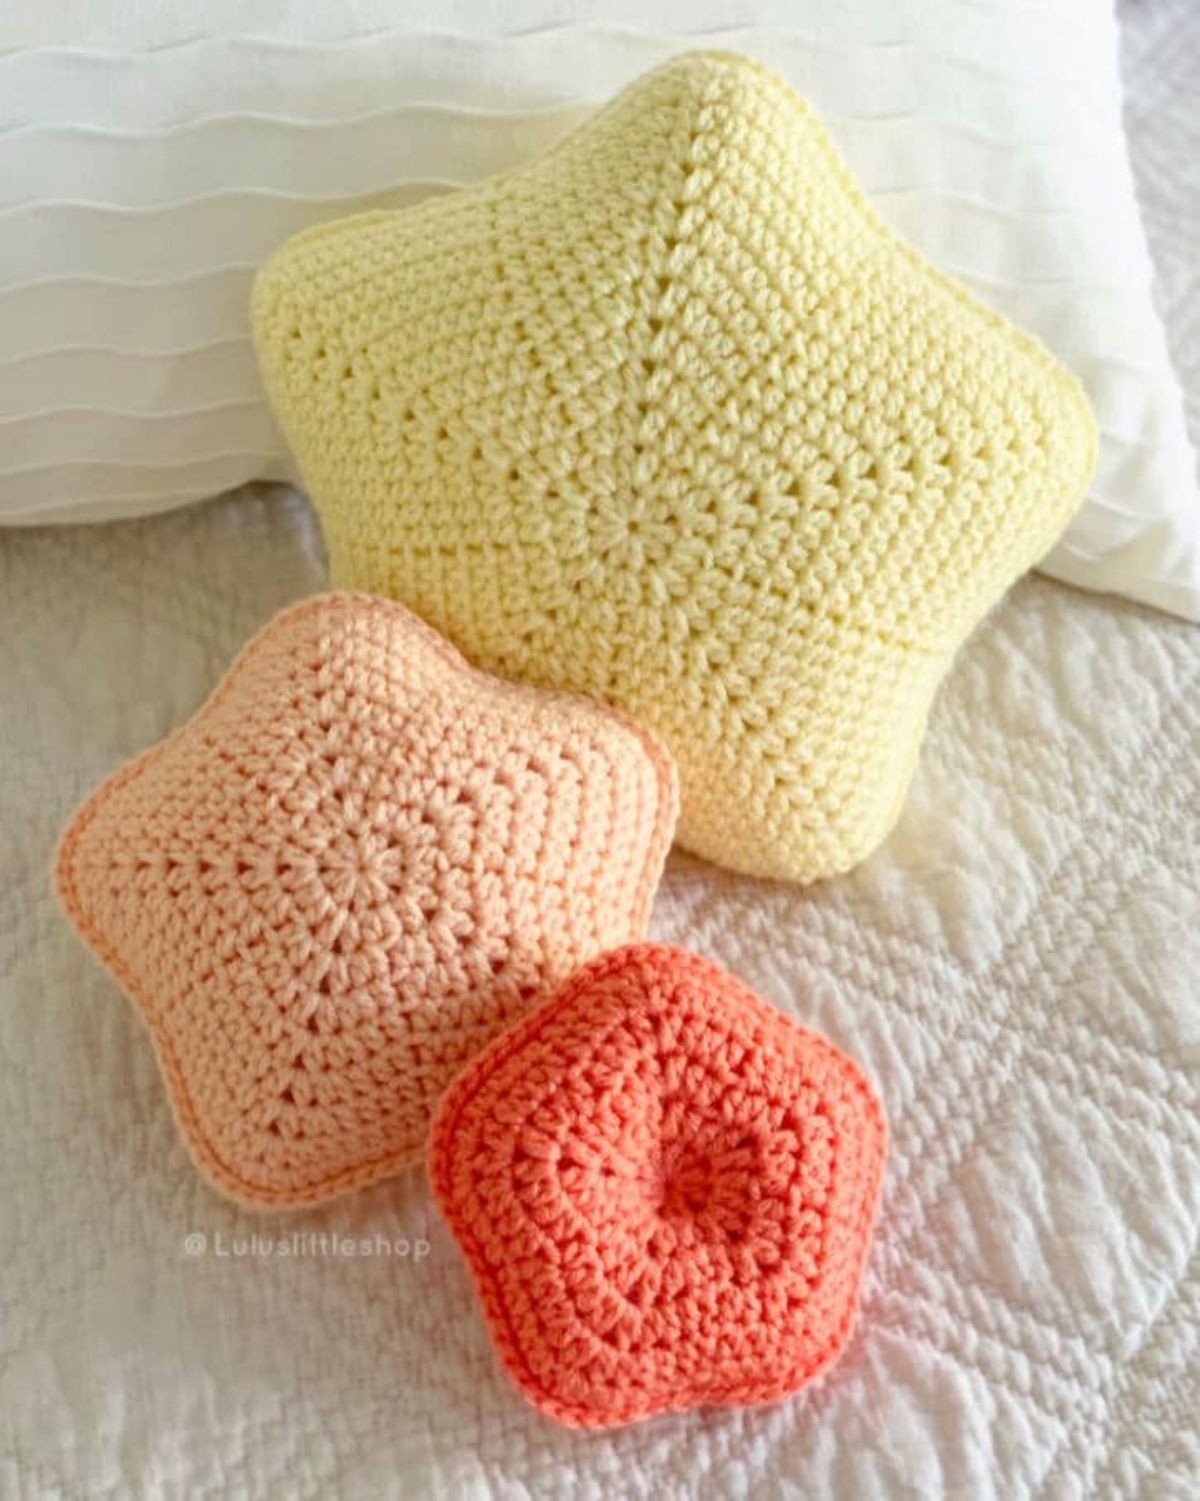 A small coral star shaped crochet cushion in front of a peach and larger yellow cushion. All cushions are stuffed and sit on white bedding. 